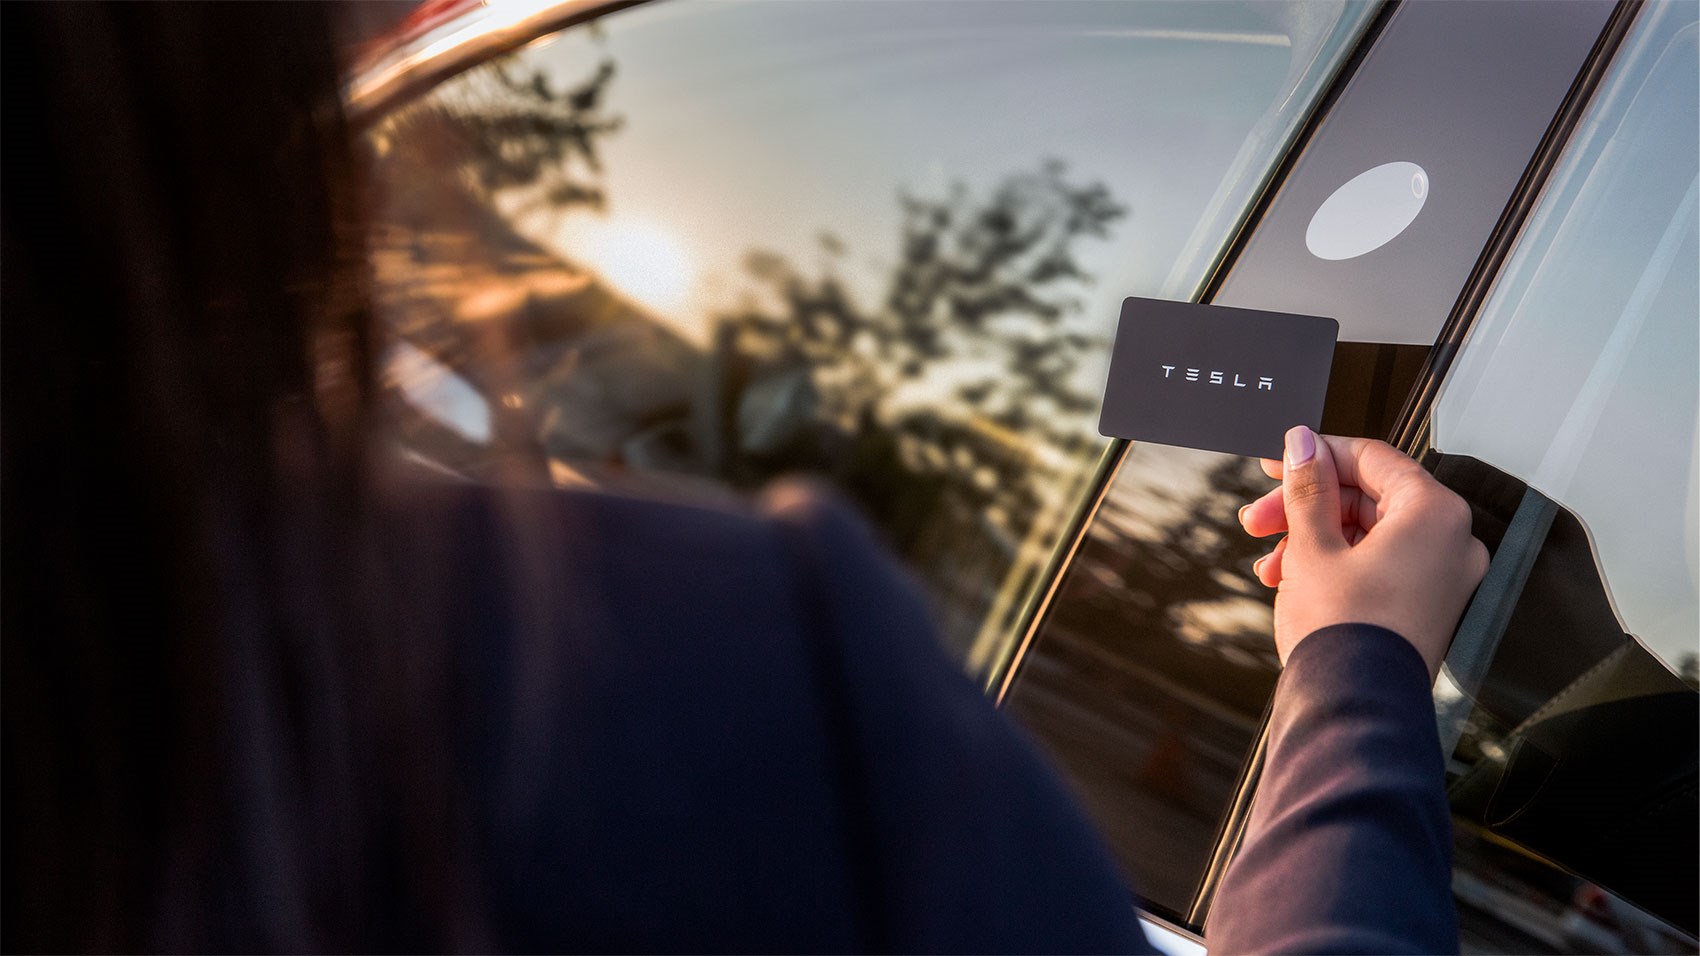 Hold up a Tesla credit card size access key to the B-pillar to unlock the Model 3